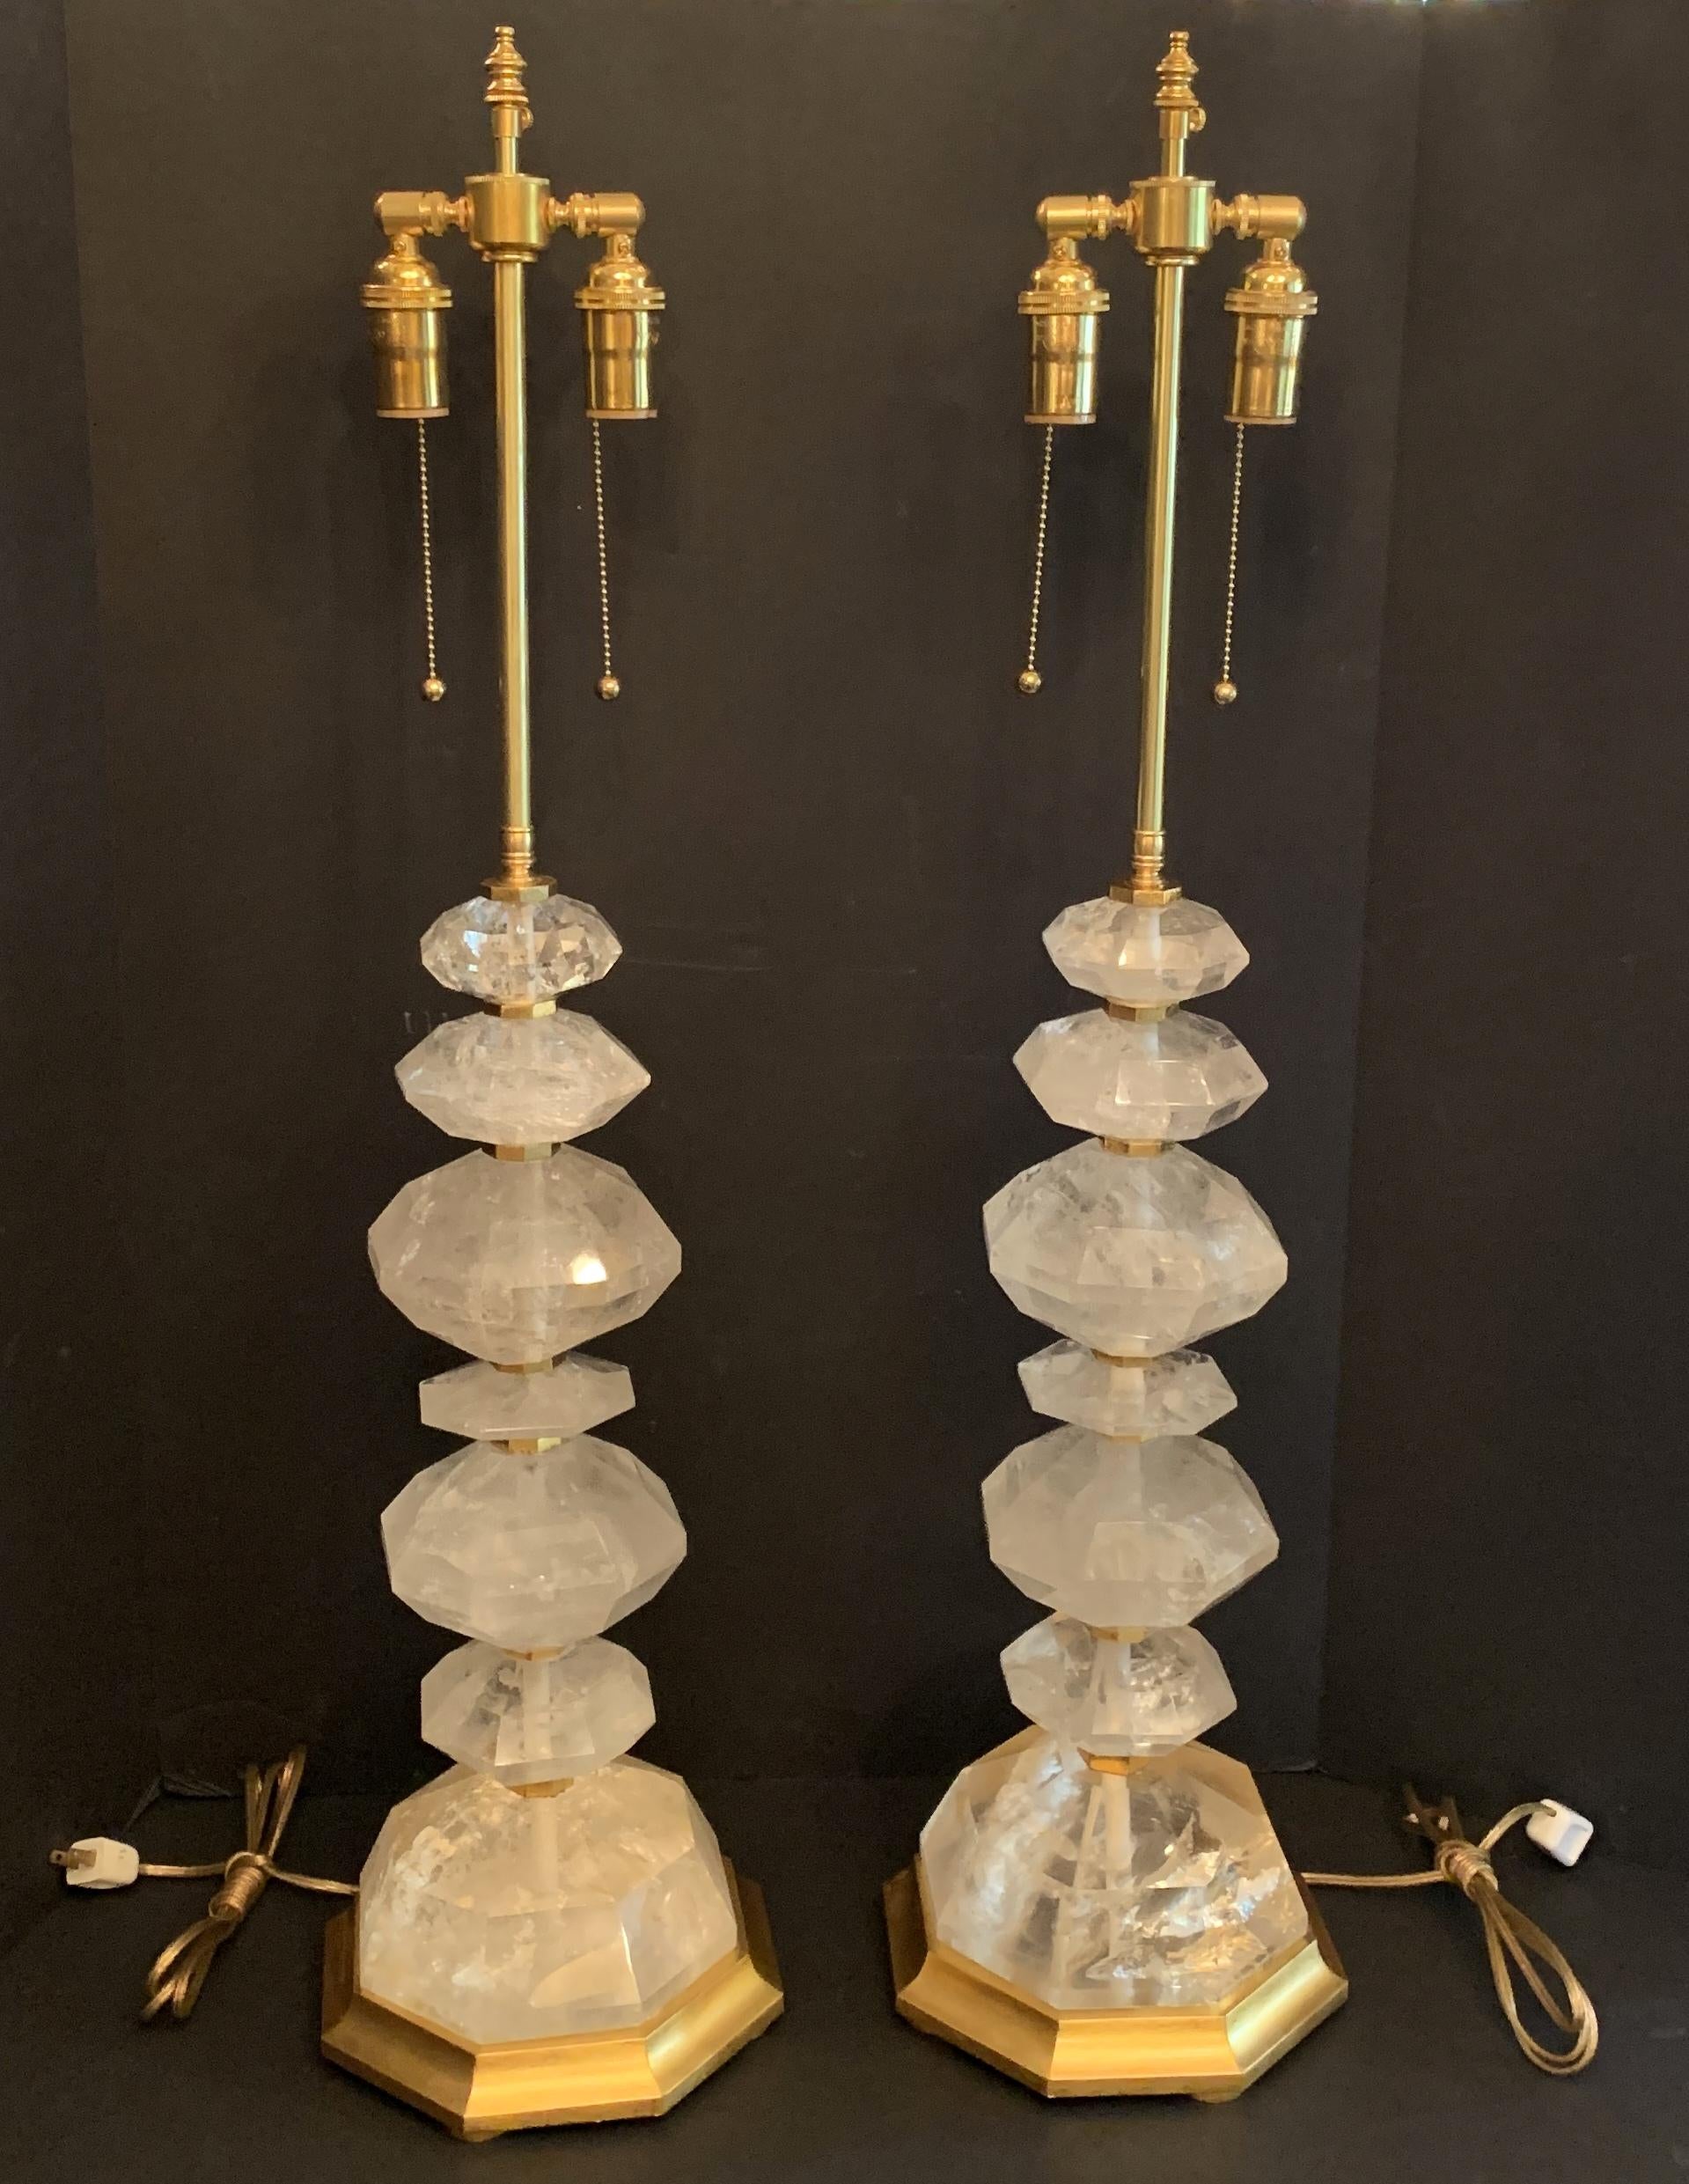 A wonderful pair of Mid-Century Modern rock crystal and giltwood table lamps very rare to have in this size in the manner of Baguès
Completely rewired with two Edison sockets each and ready to enjoy.